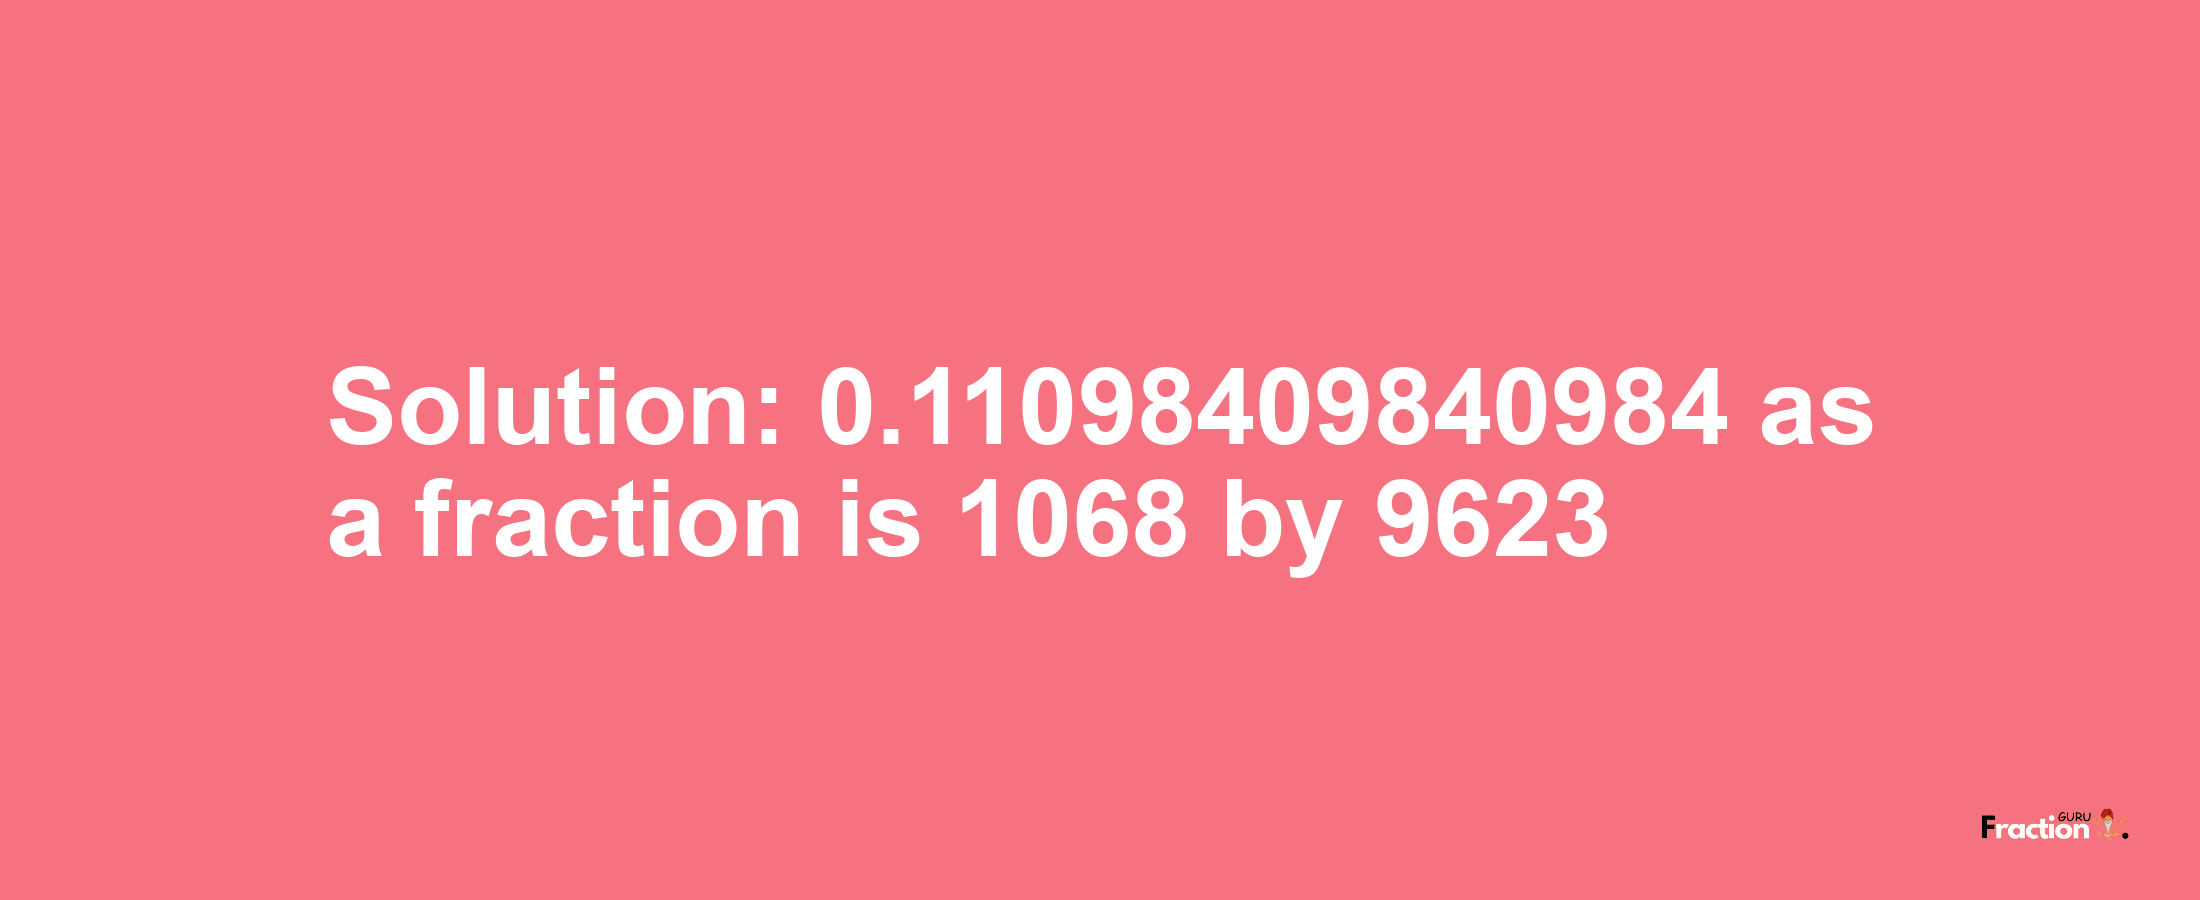 Solution:0.11098409840984 as a fraction is 1068/9623